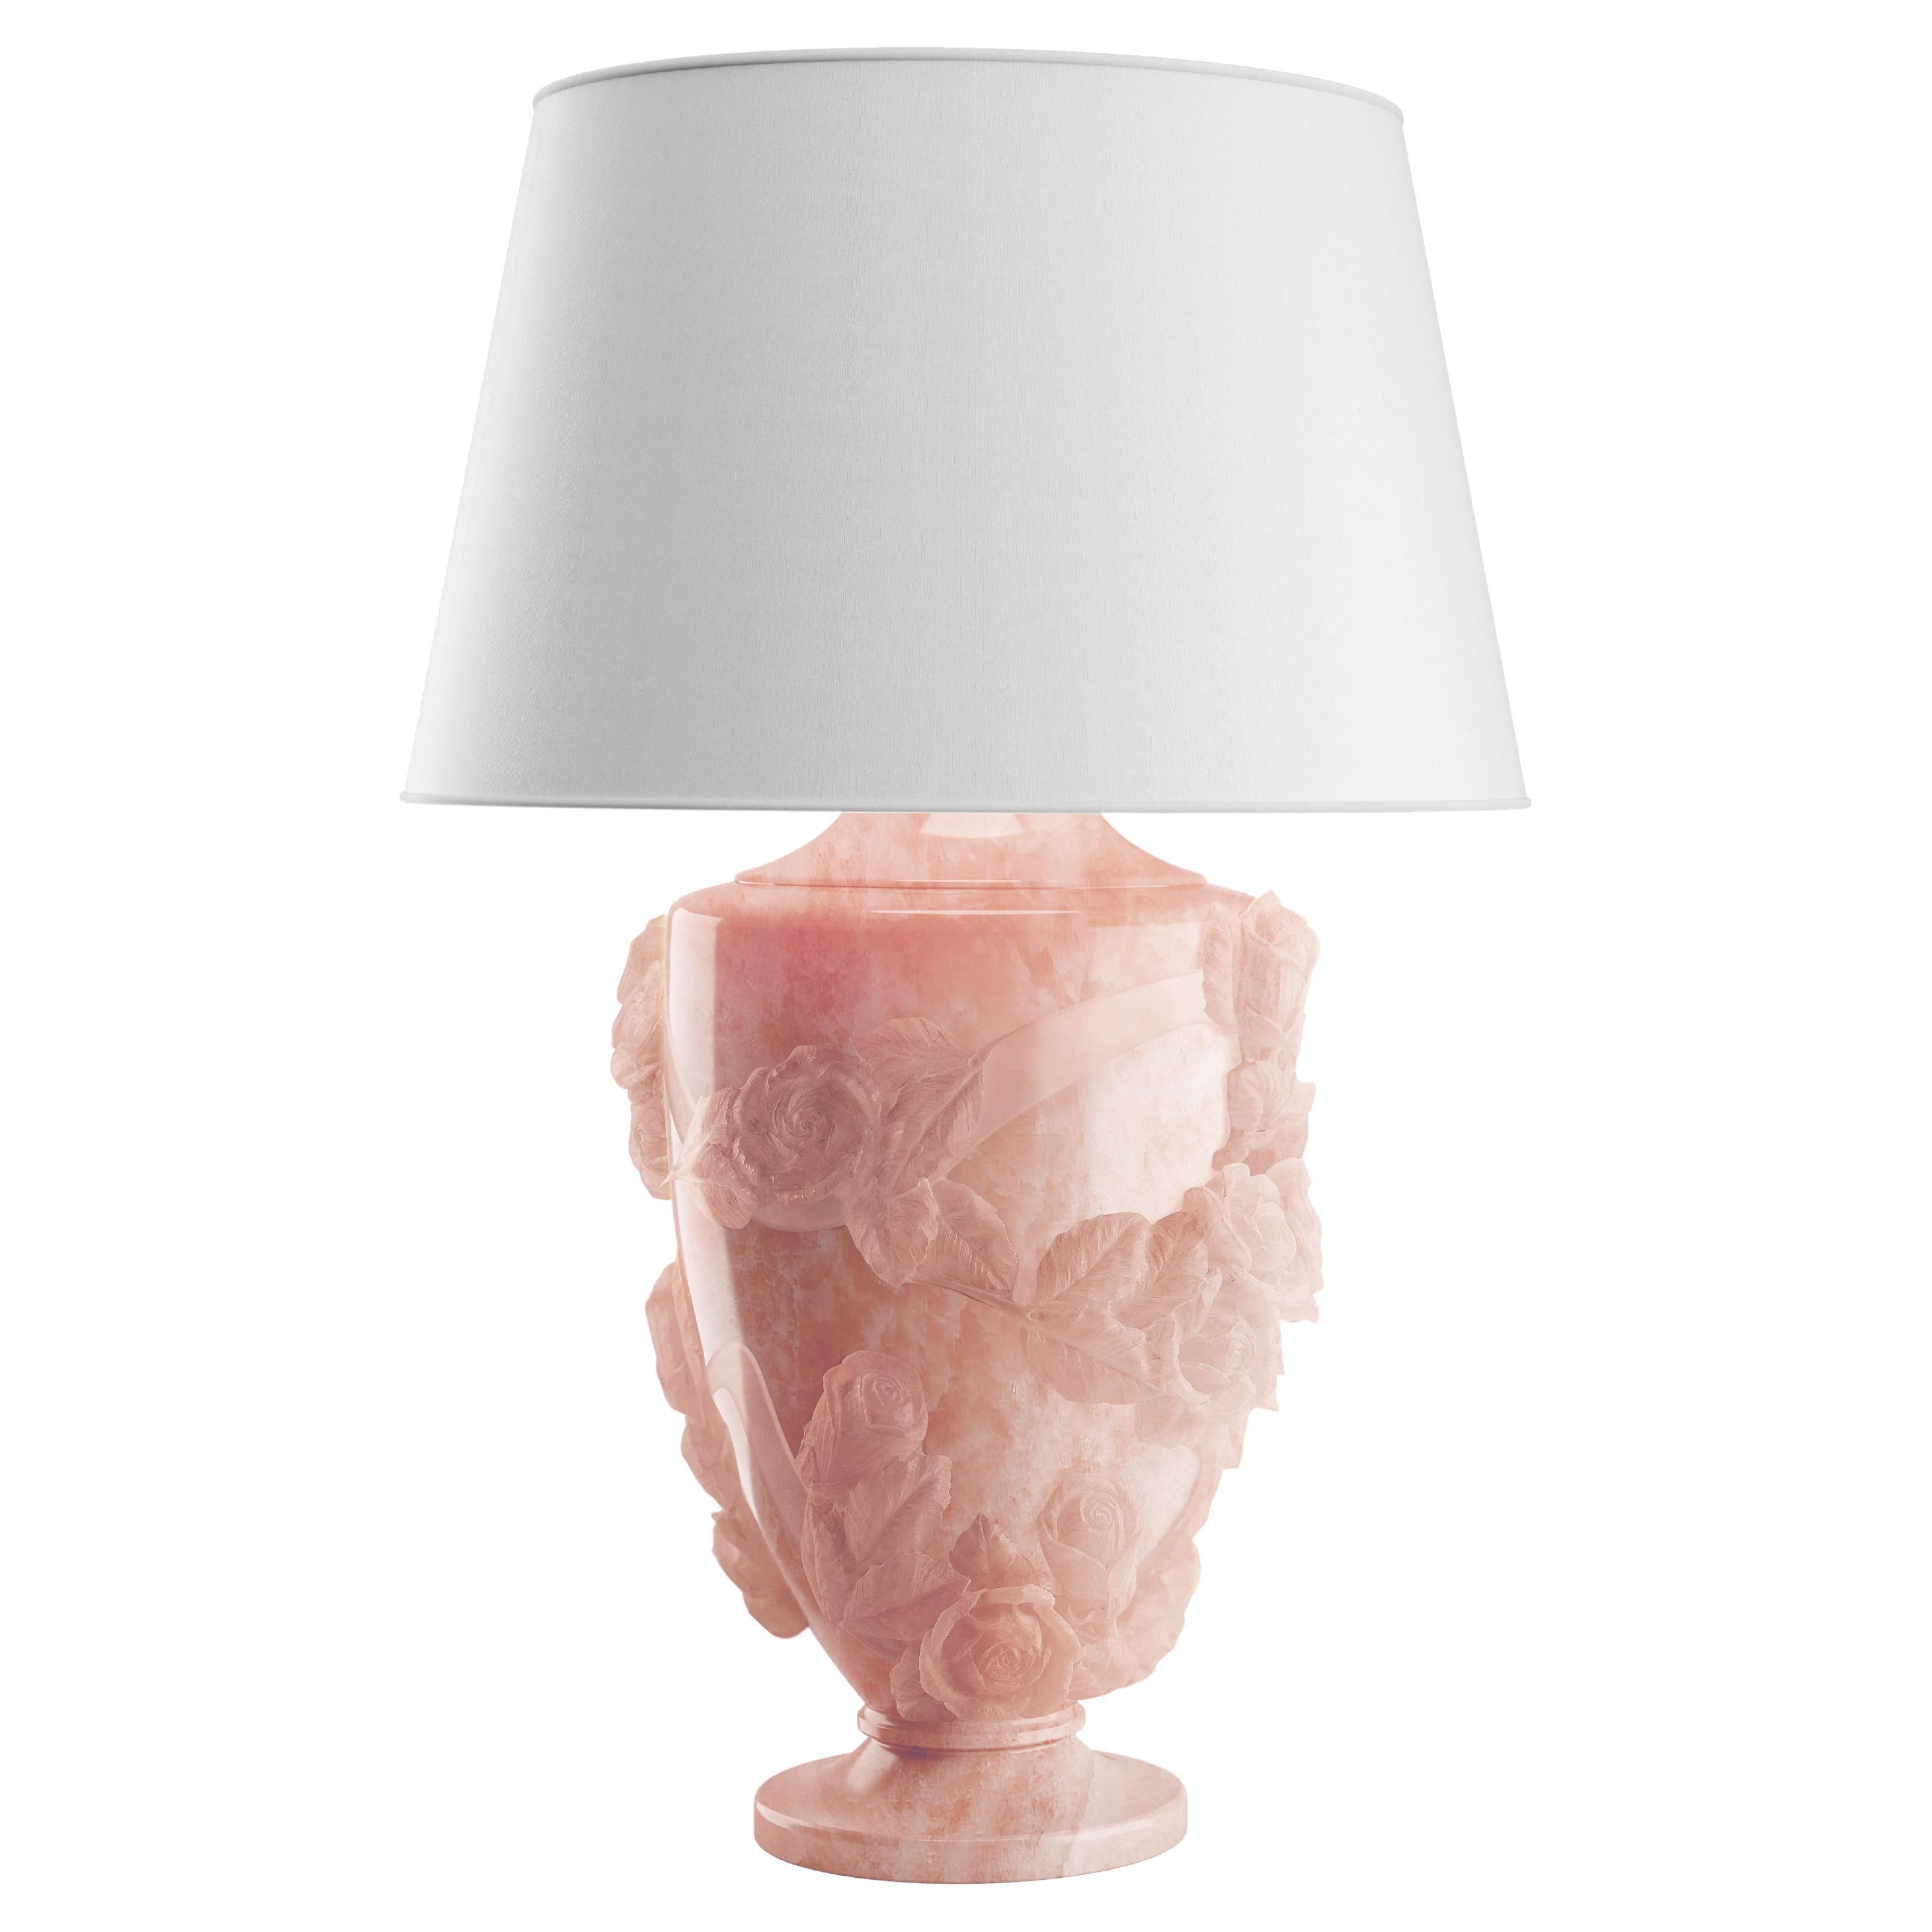 Rose Sculpture Table Lamp 13 Roses Hand Carved Pink Onyx Block, Linen Lampshade 